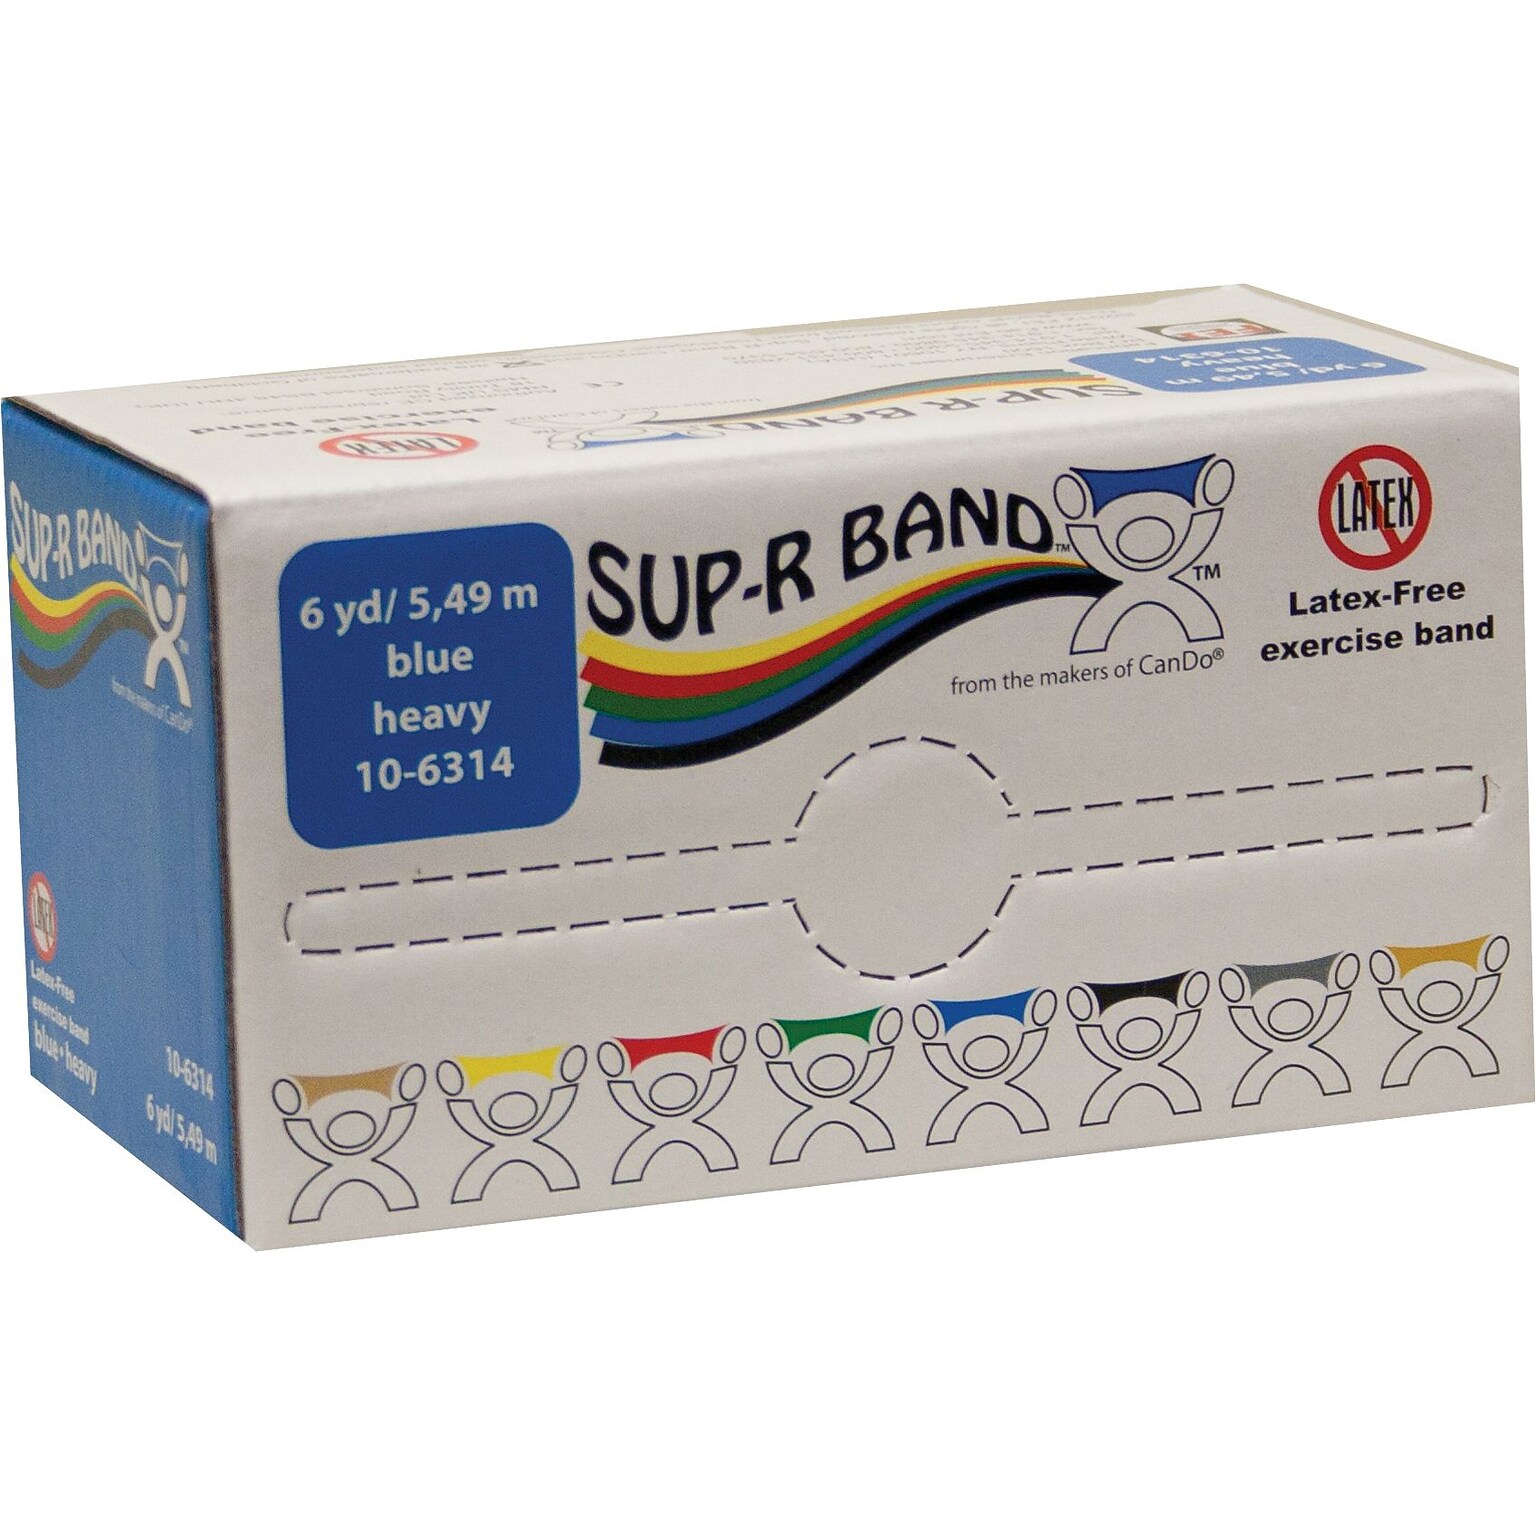 Sup-R Band® Latex-Free Exercise Band; Blue, Heavy, 6 Yard